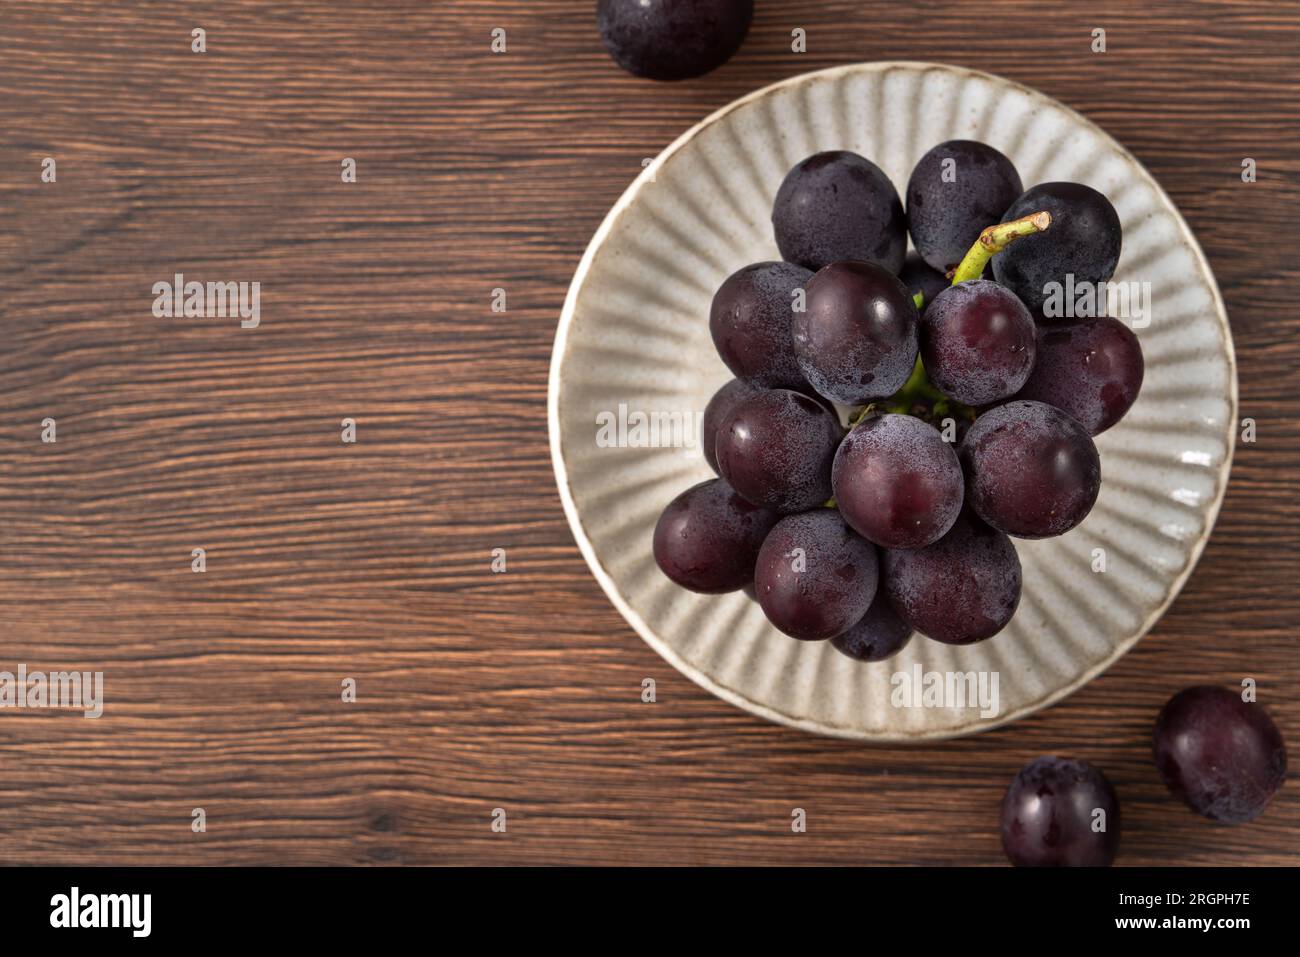 Delicious bunch of purple grapes fruit in a plate on wooden table background. Stock Photo